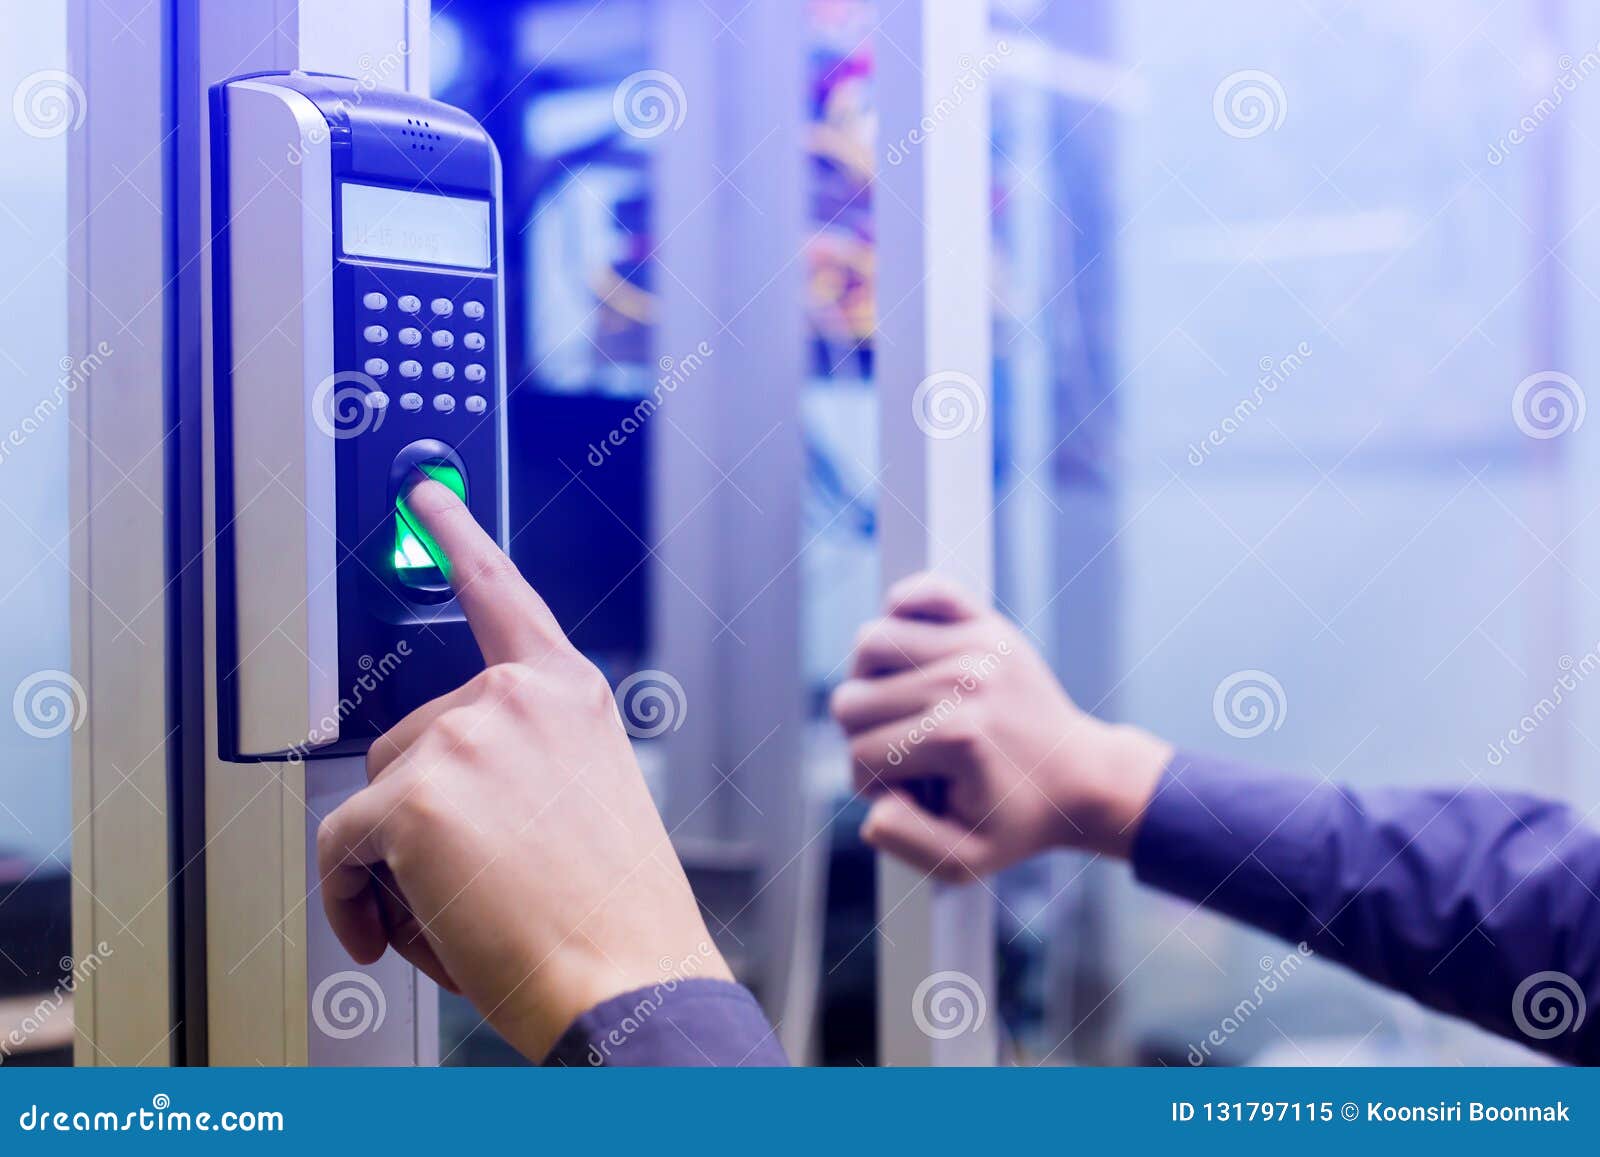 staff push down electronic control machine with finger scan to access the door of control room or data center. the concept of data